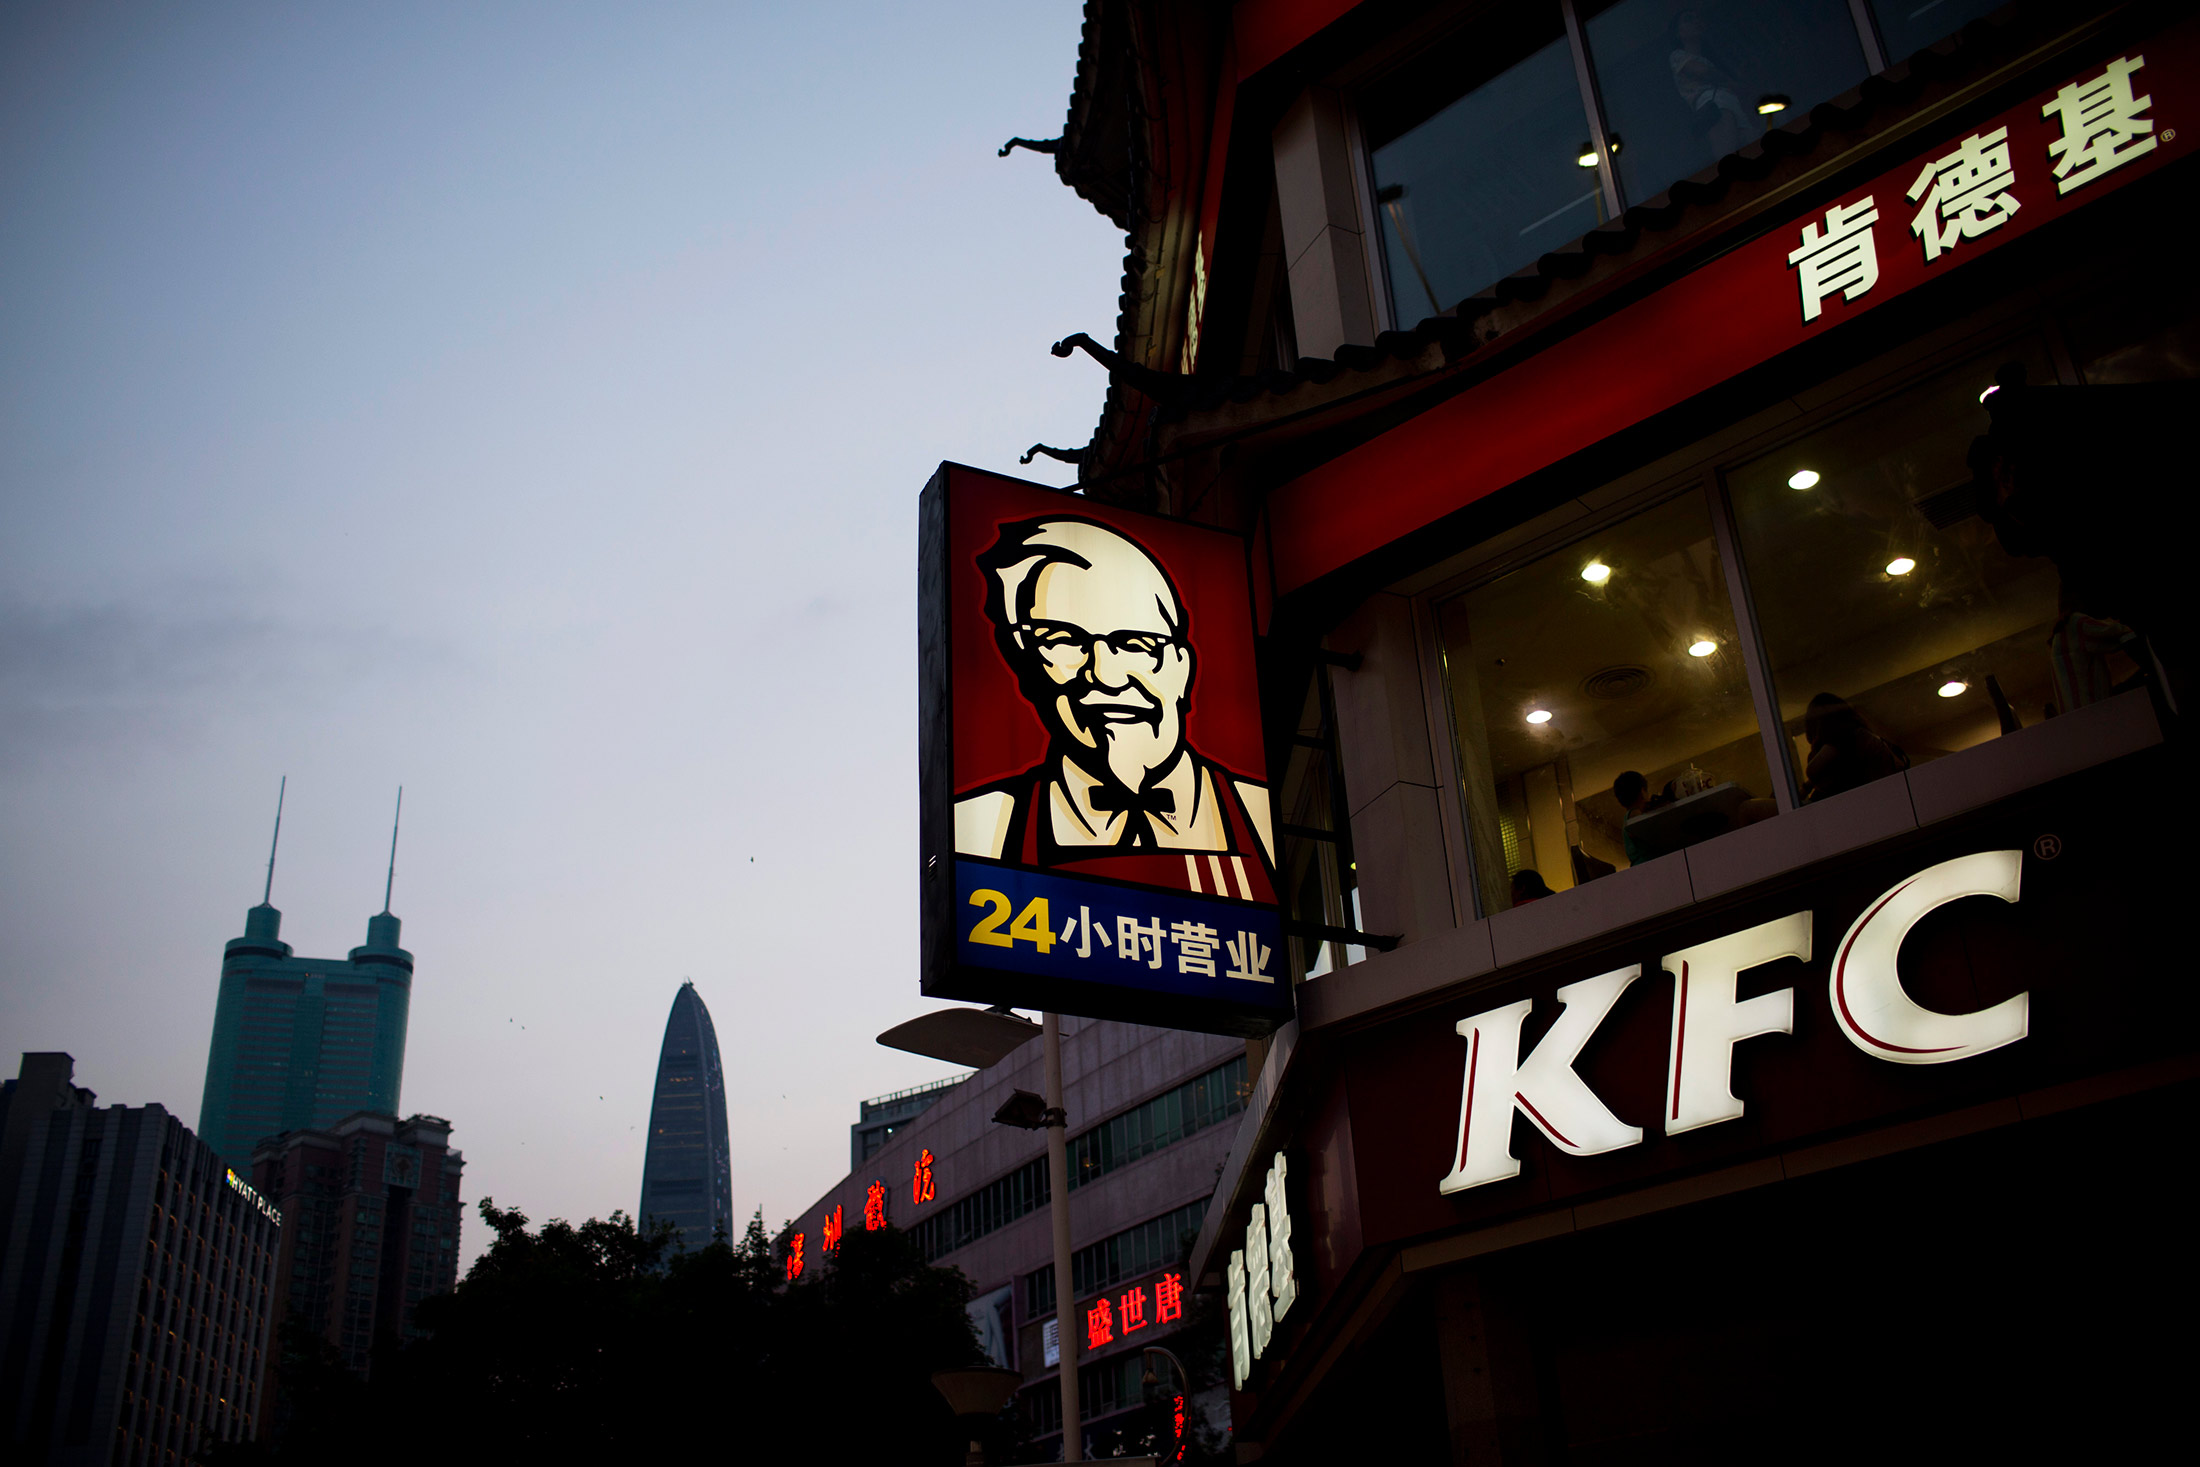 A KFC restaurant, operated by Yum! Brands Inc., in the pedestrianized Dongmen area of Shenzhen, China, on Aug. 4, 2014.
